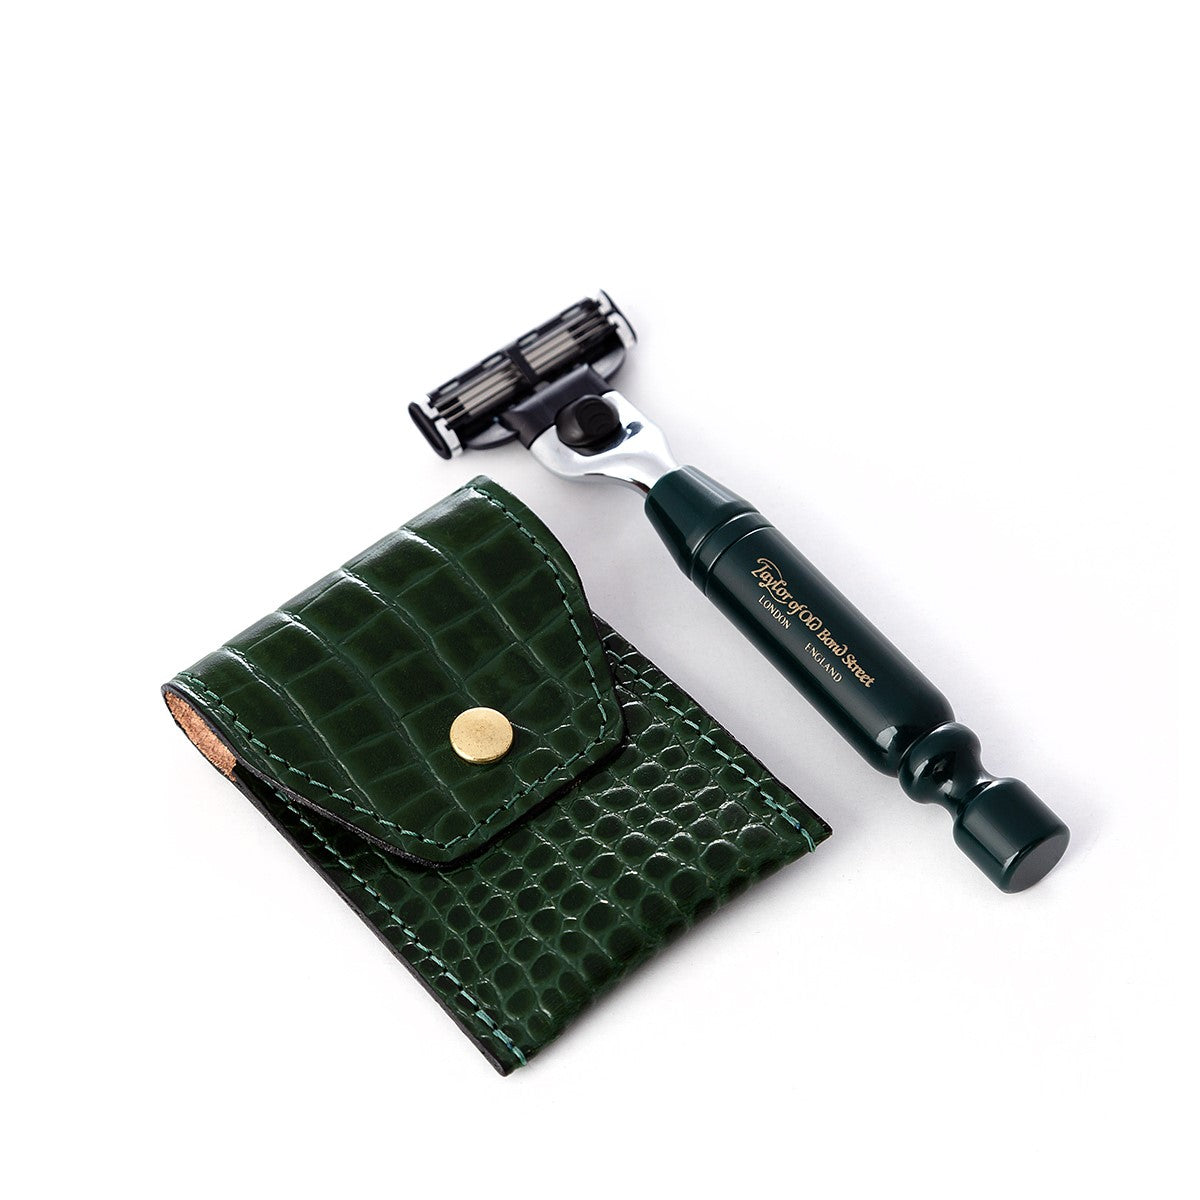 Two-piece Travel Mach3 Razor in Leather pouch